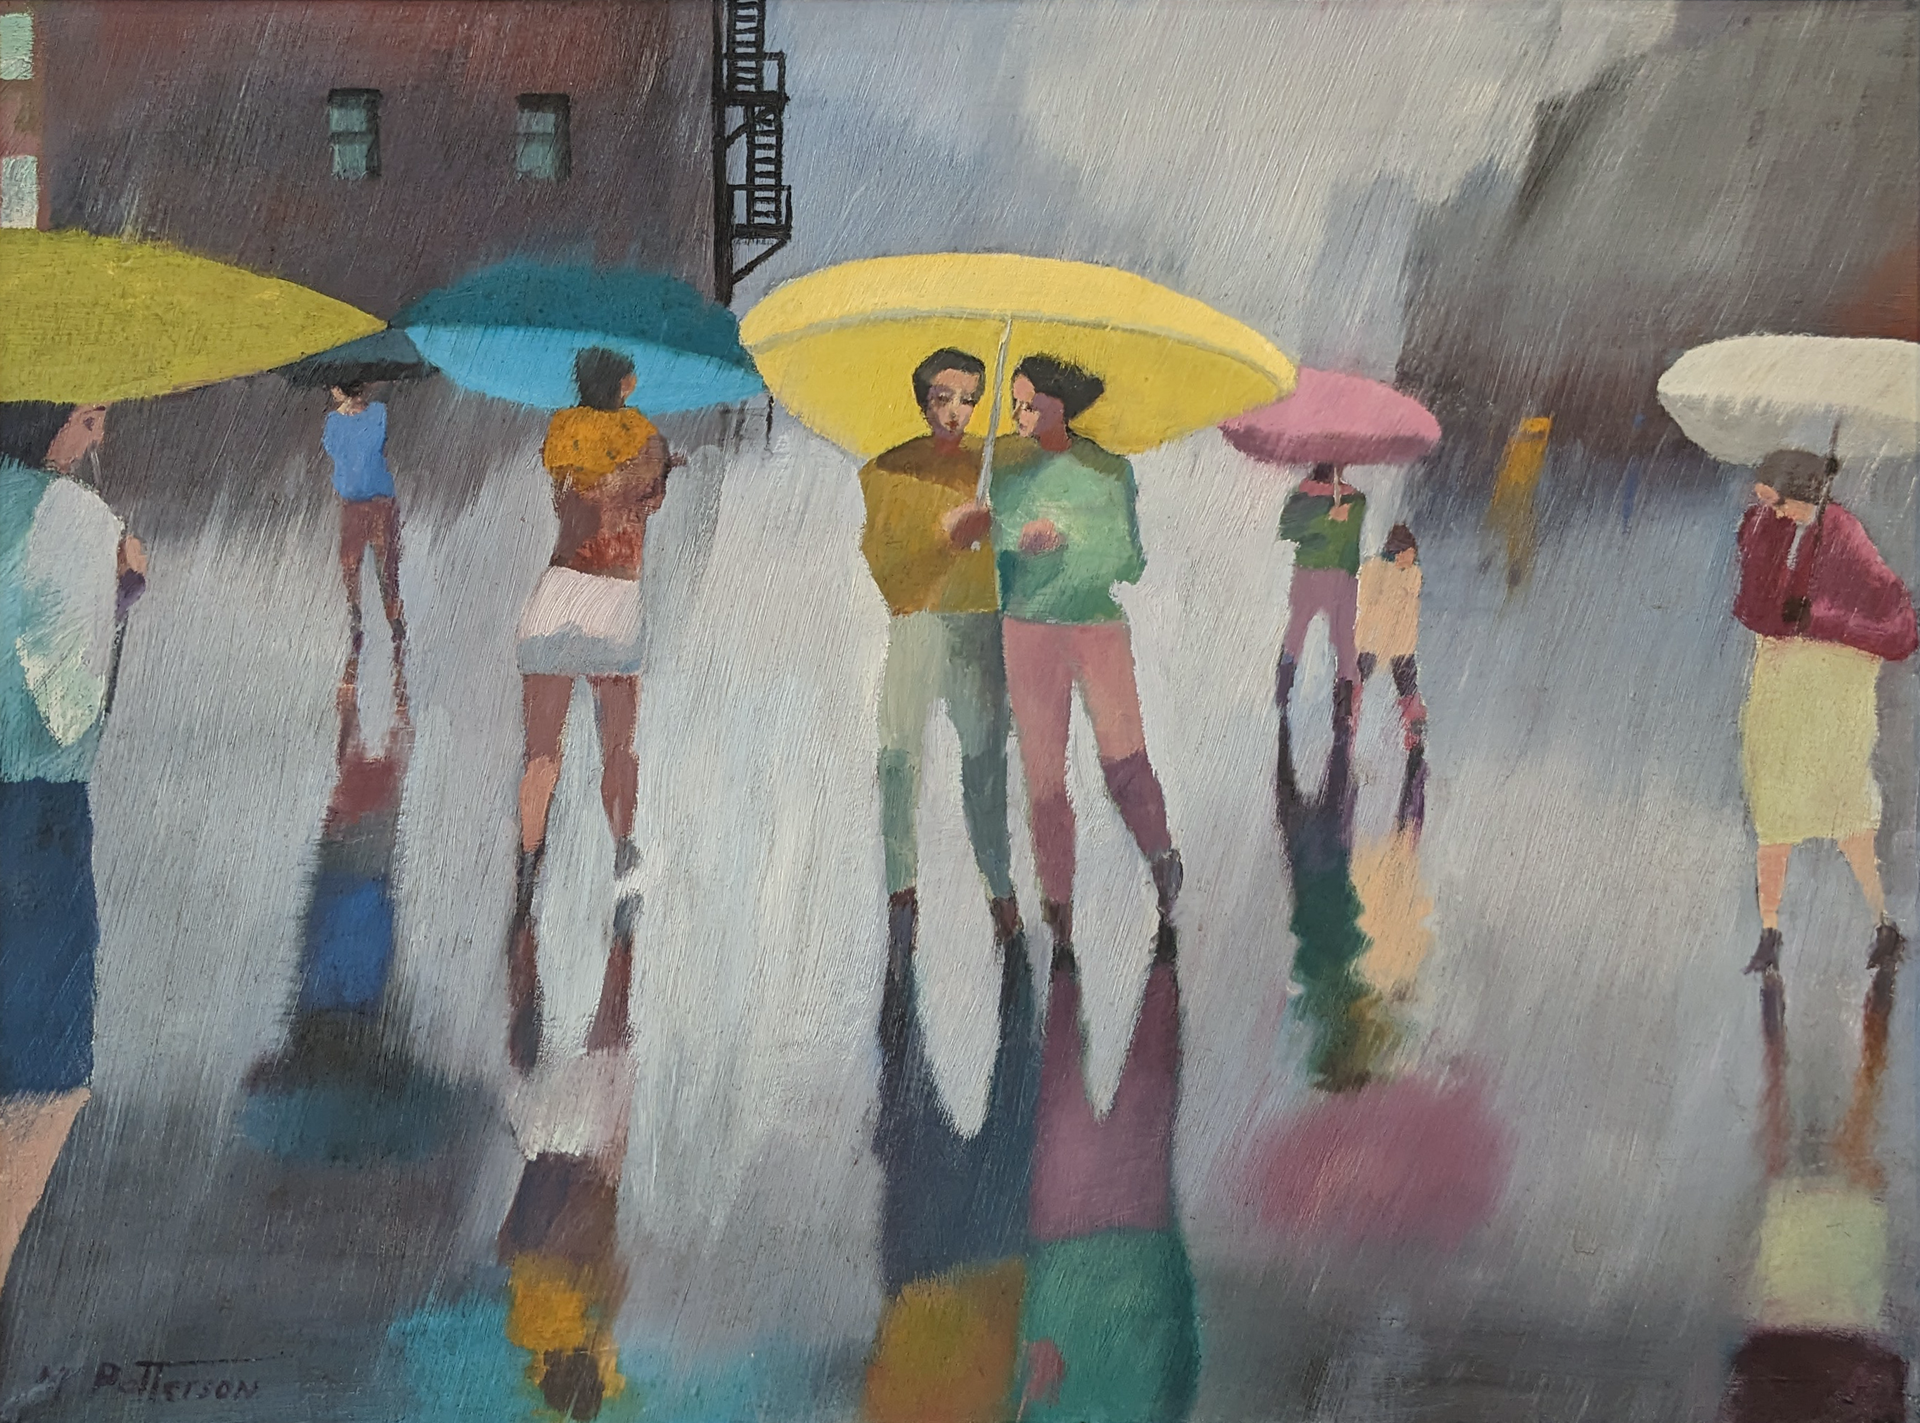 NYC: Walking in the Rain with You by Michael Patterson